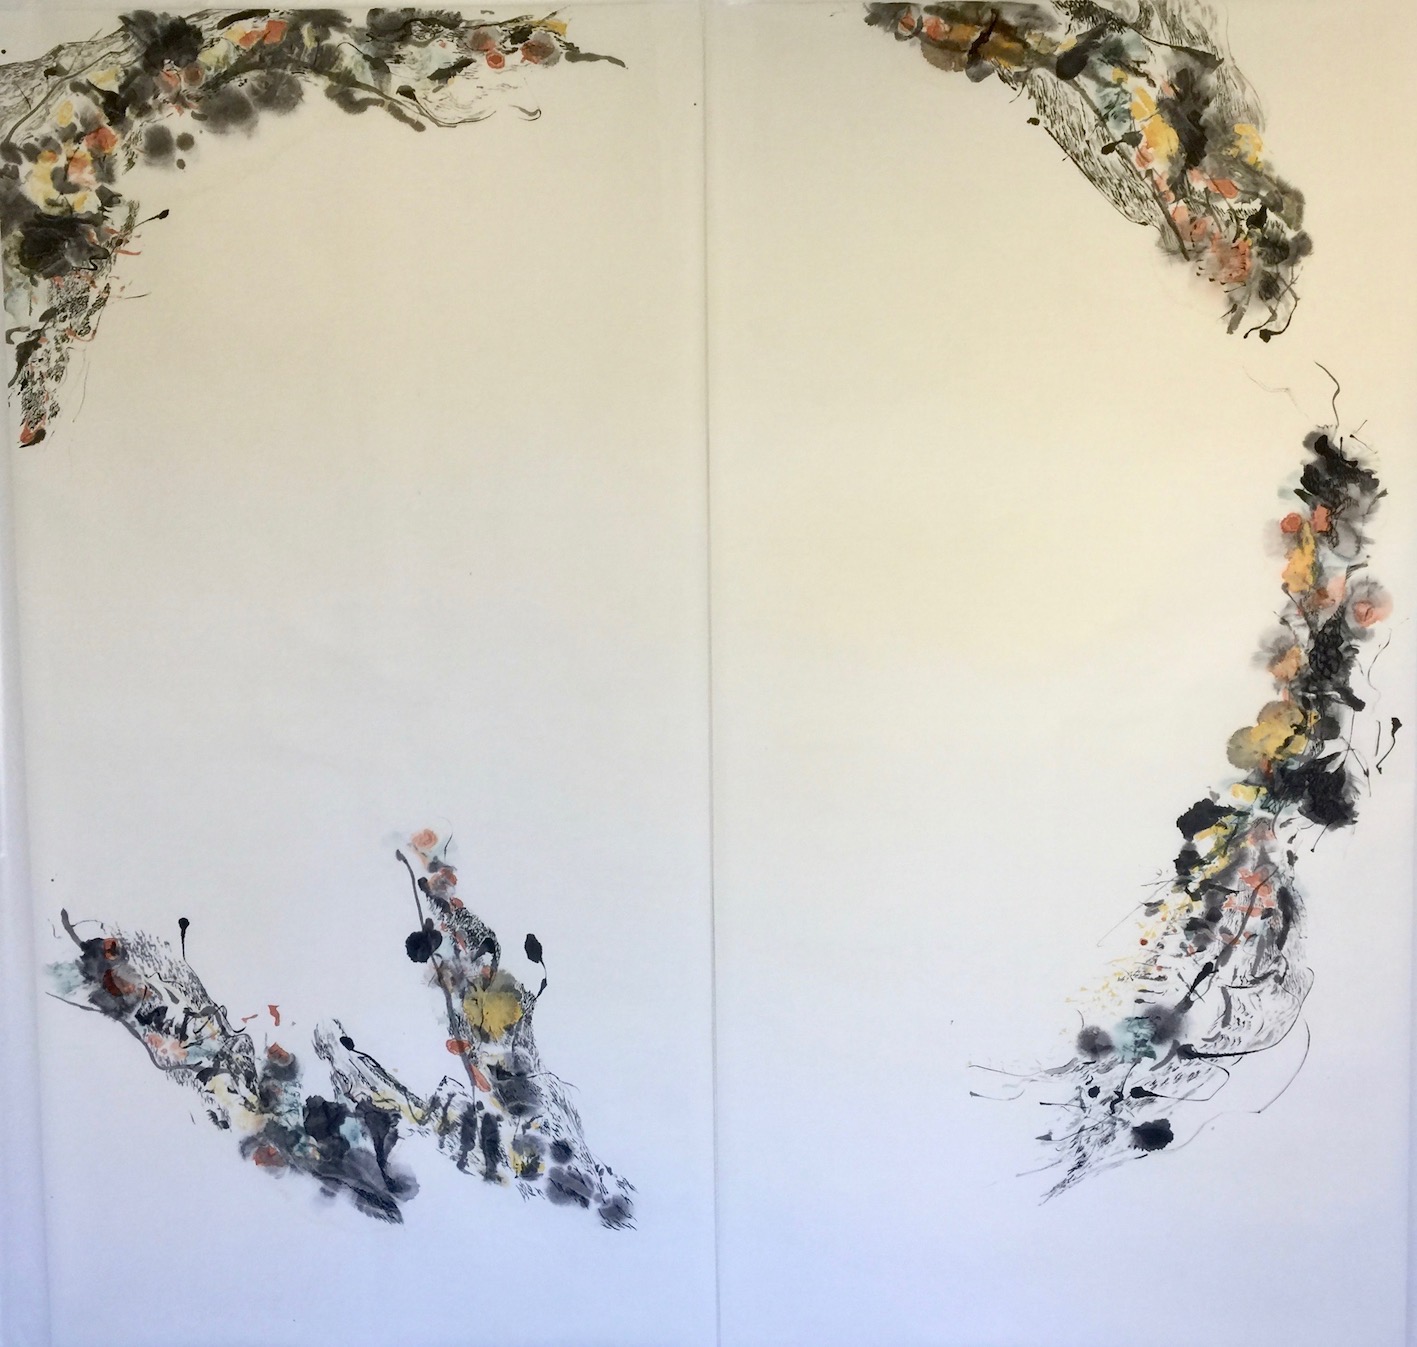 Opening up lines in space 2 空間に線を開く 2 138 cms x 70 cms x 2 Sumi ink, acrylic, water colour, 墨水彩絵具、アクリル2021